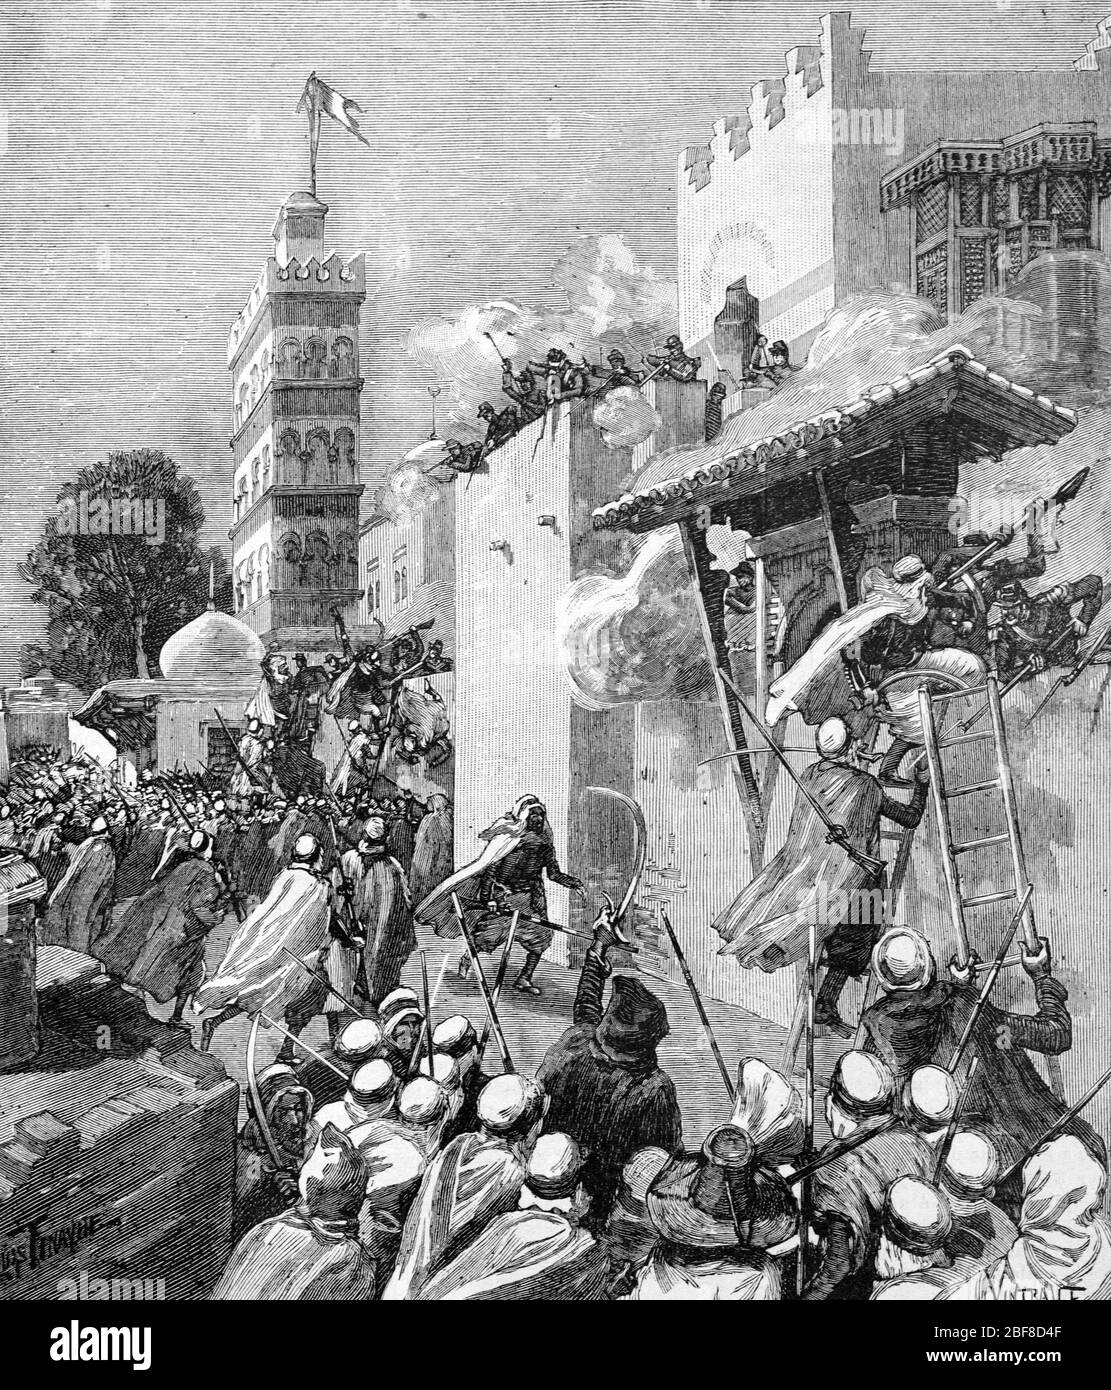 Battle of Mazagrin, February 1840, between Arab and Berber forces against French troops during the French Conquest of Algeria. Vintage or Old Illustration or Engraving 1889 Stock Photo